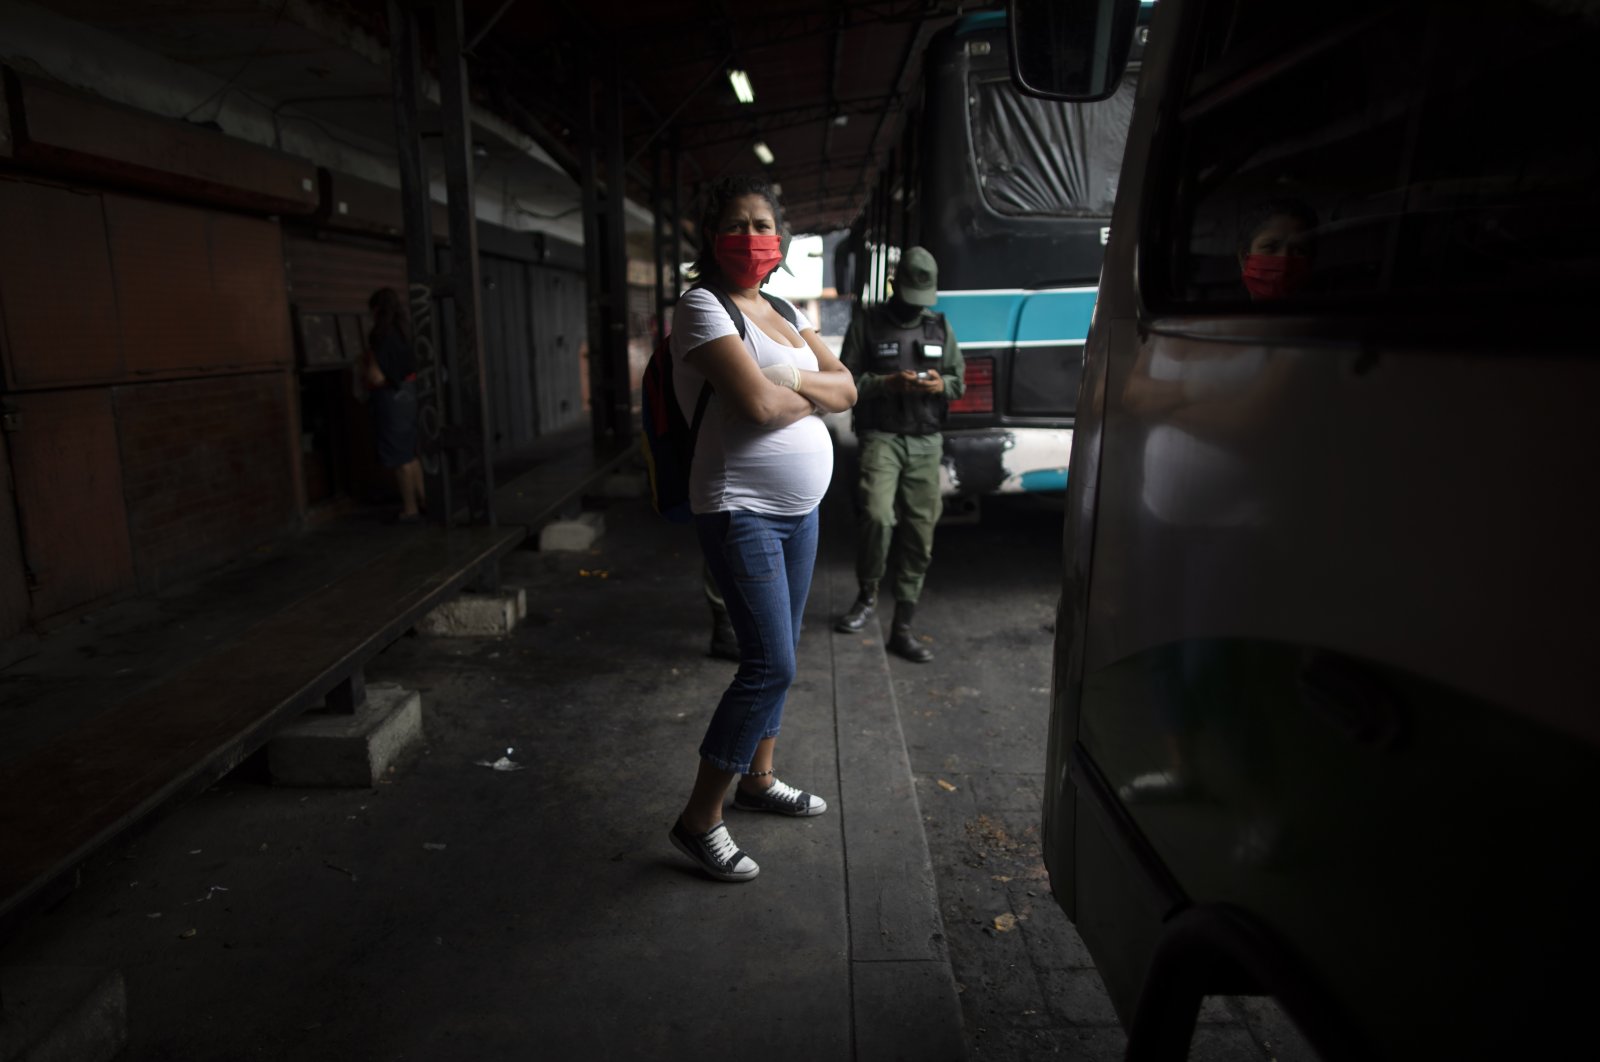 A pregnant woman wearing a protective face mask as a measure to curb the spread of the new coronavirus waits for a bus in Caracas, Venezuela, April 21, 2020. (AP Photo)